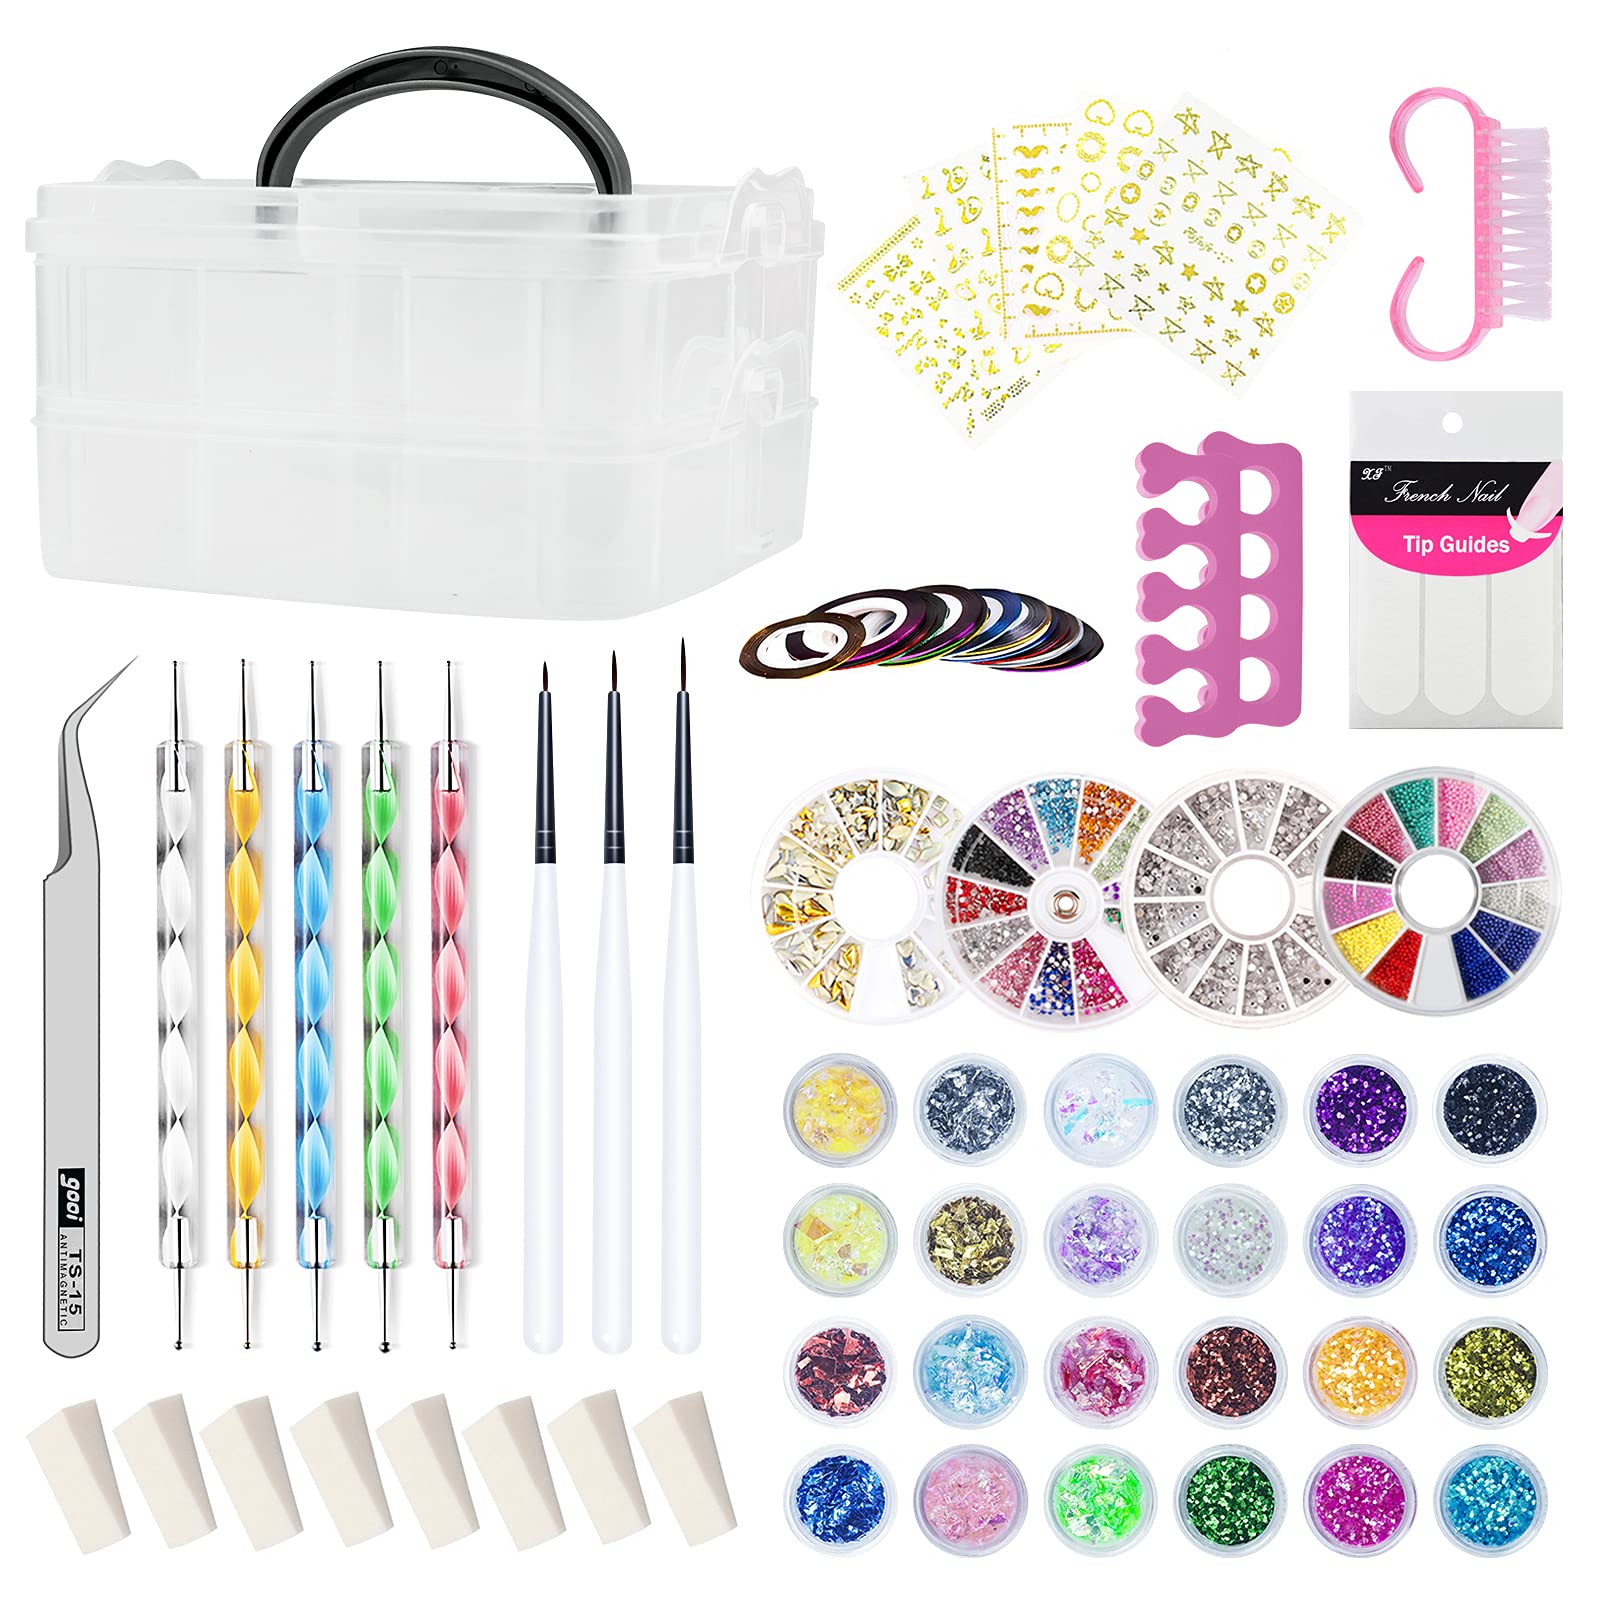 gustave 3D Nail Art Stamping Kit, 3D Nail Art Tools with Pen & Brush  Painting Polish - Price in India, Buy gustave 3D Nail Art Stamping Kit, 3D Nail  Art Tools with